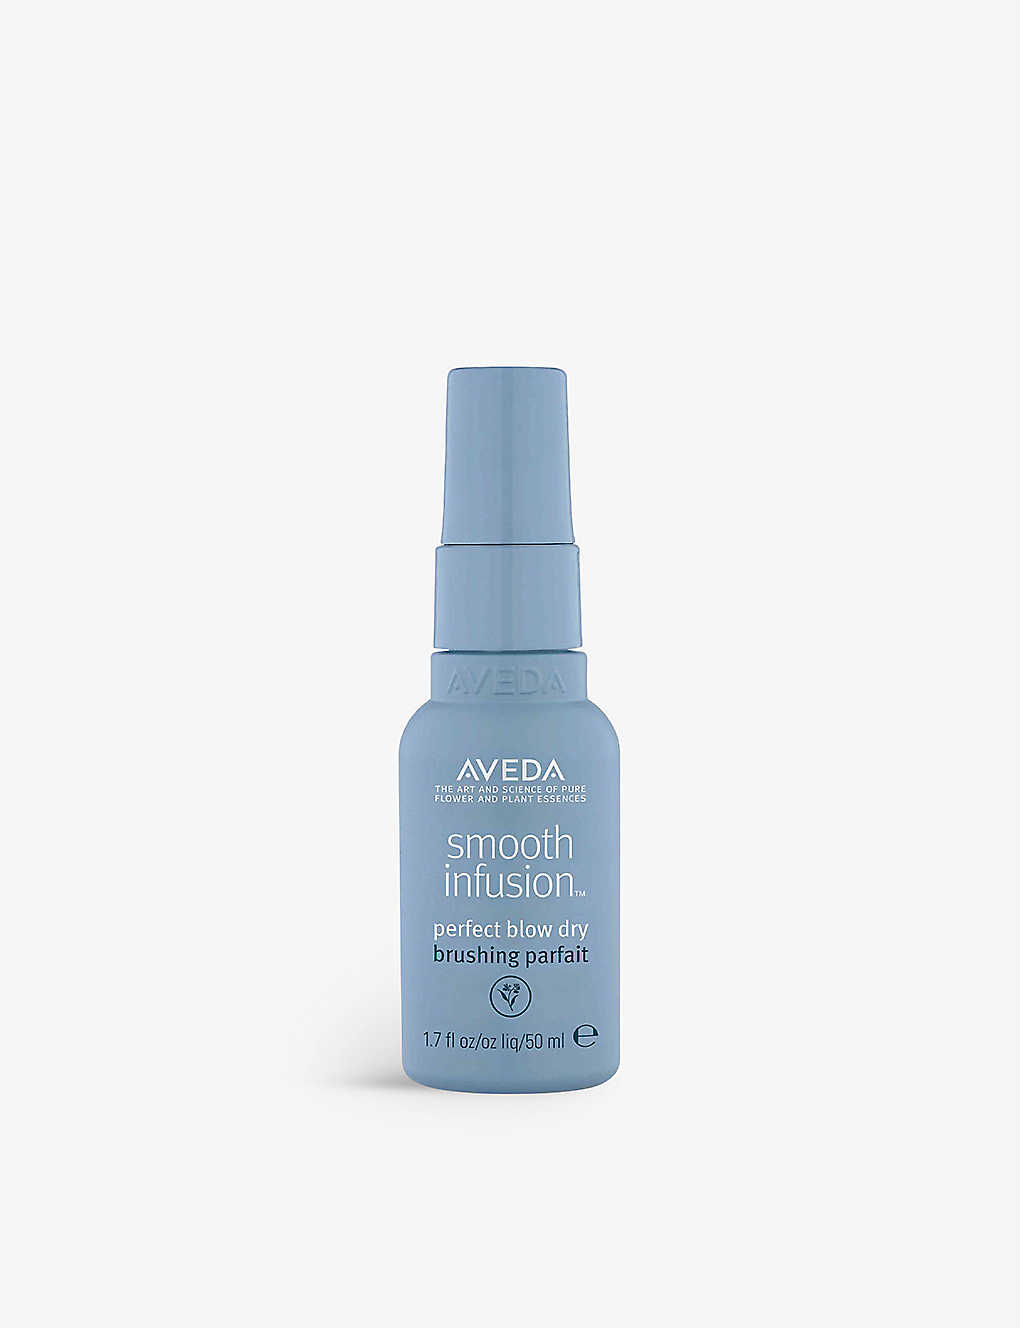 Aveda Smooth Infusion Perfect Blow Dry Hair Spray